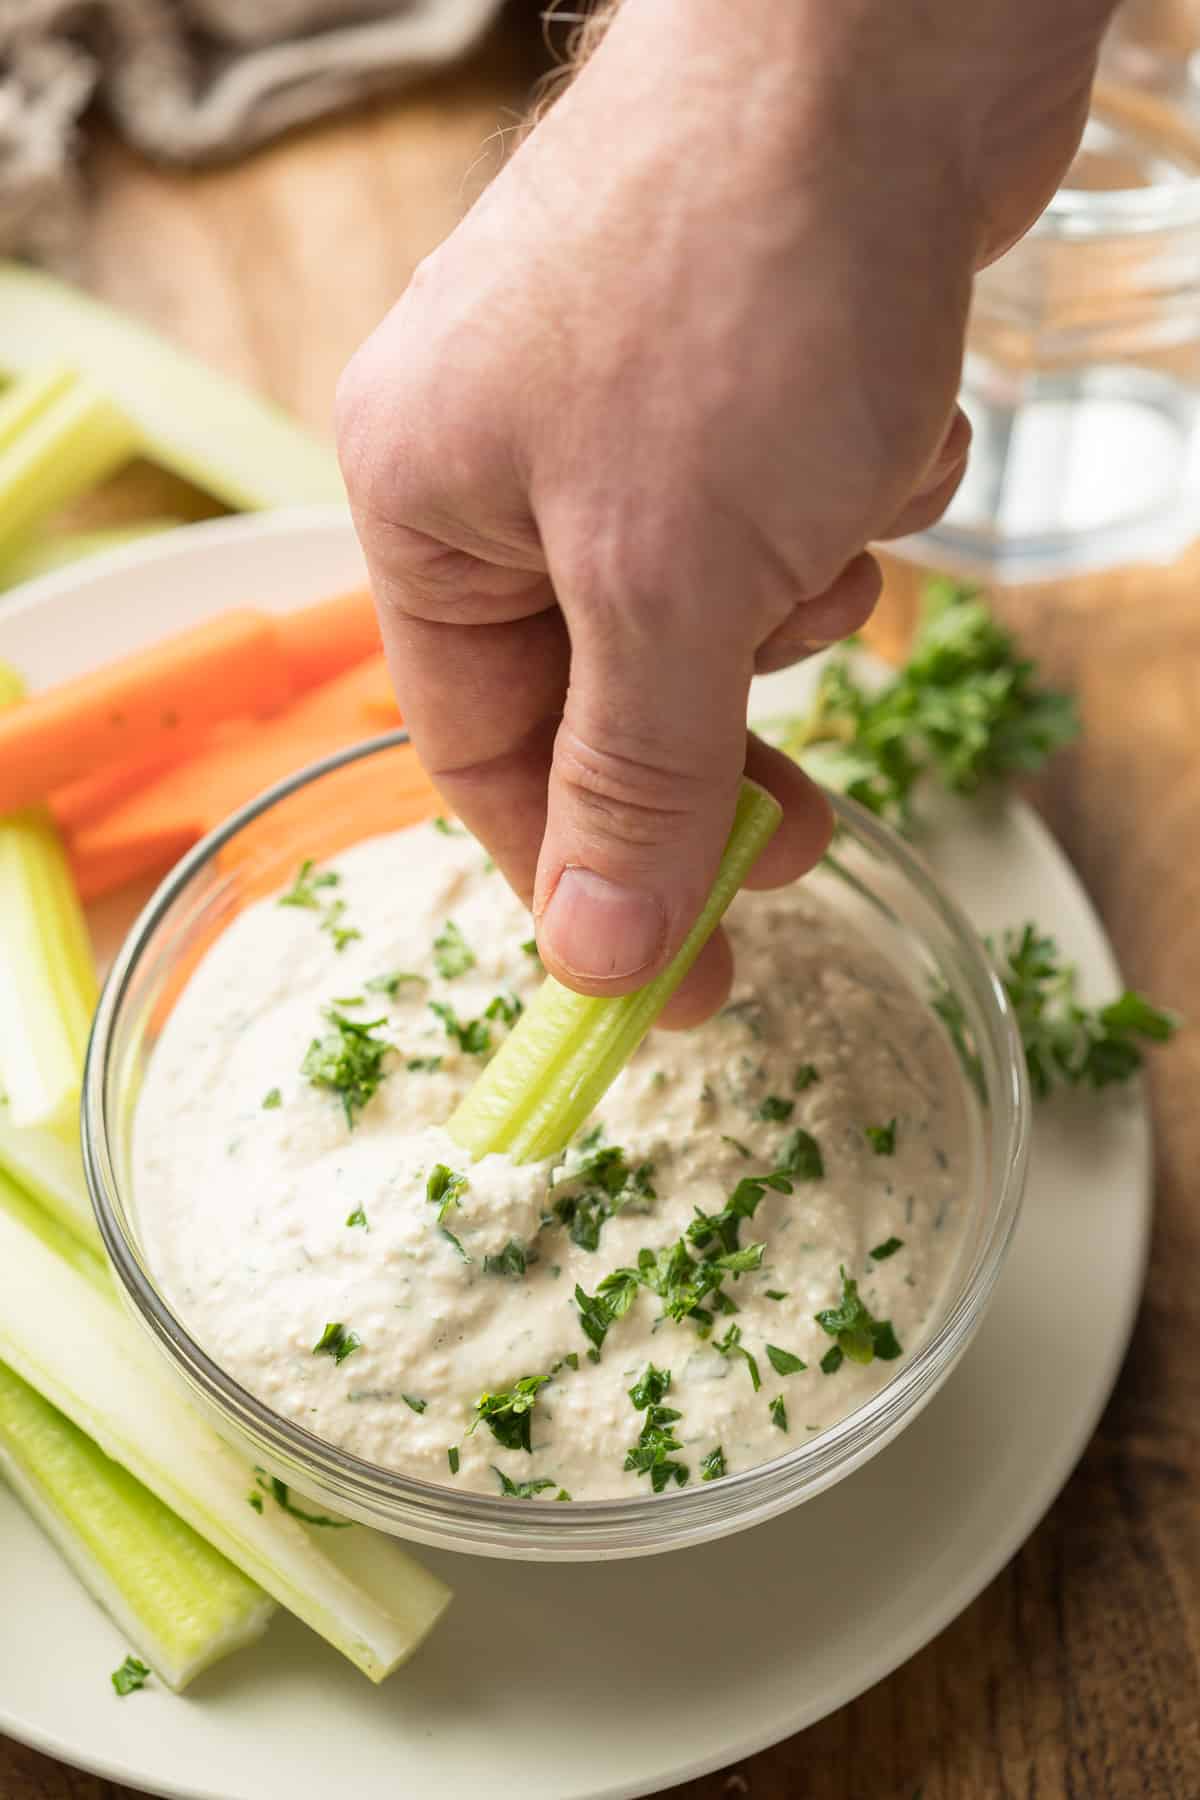 Hand Dipping a Celery Stick into a Bowl of Vegan Blue Cheese Dressing